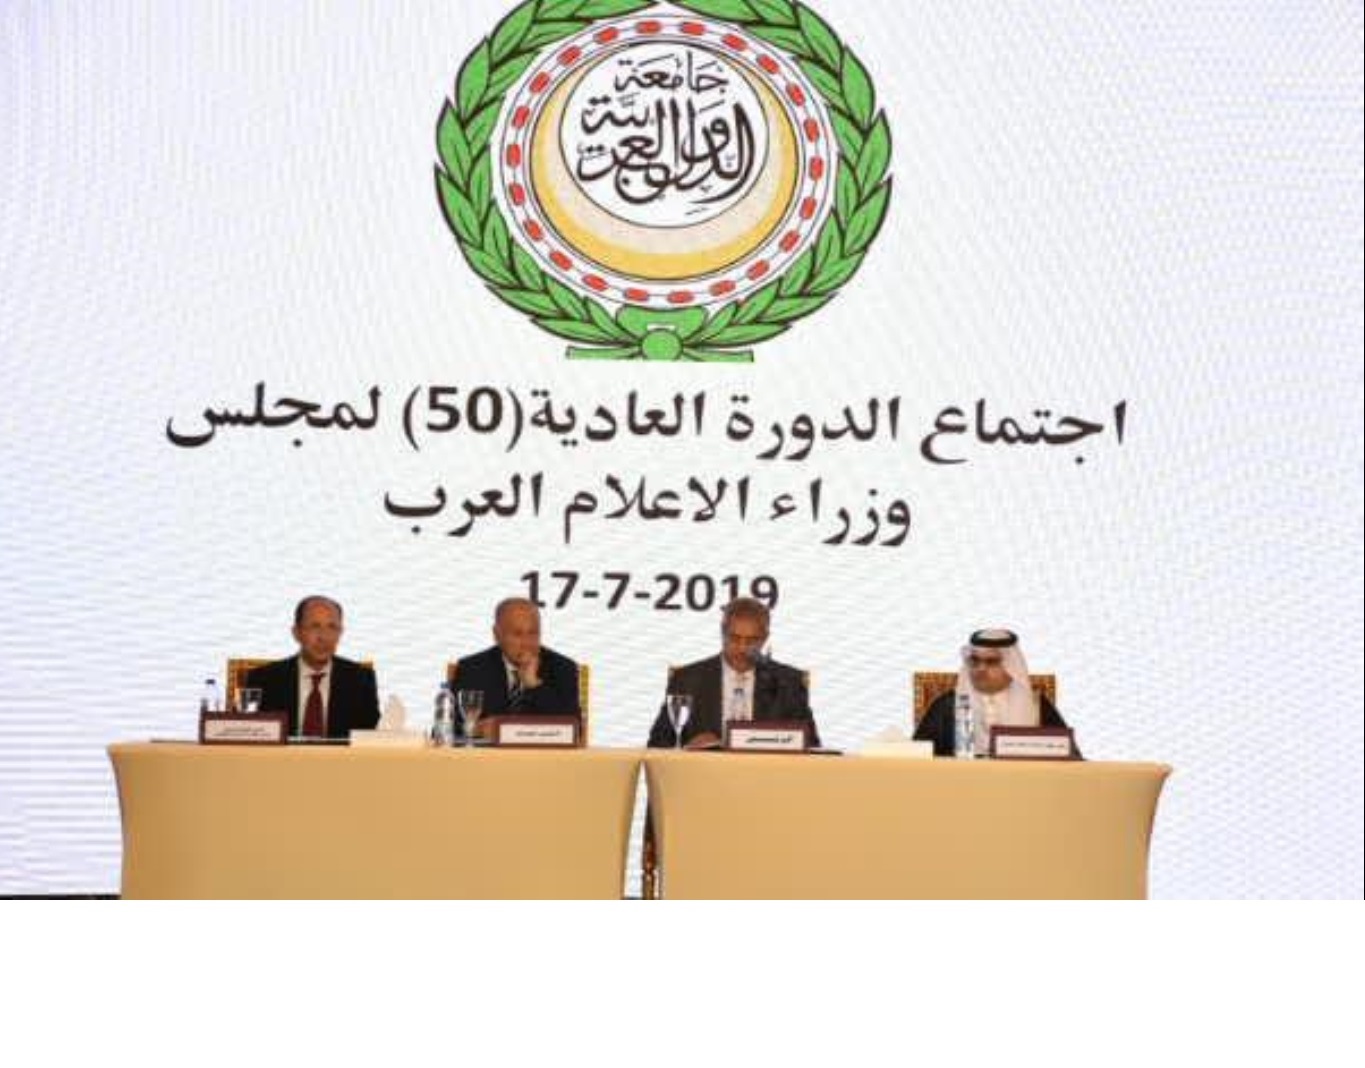 Council of Arab Information Ministers